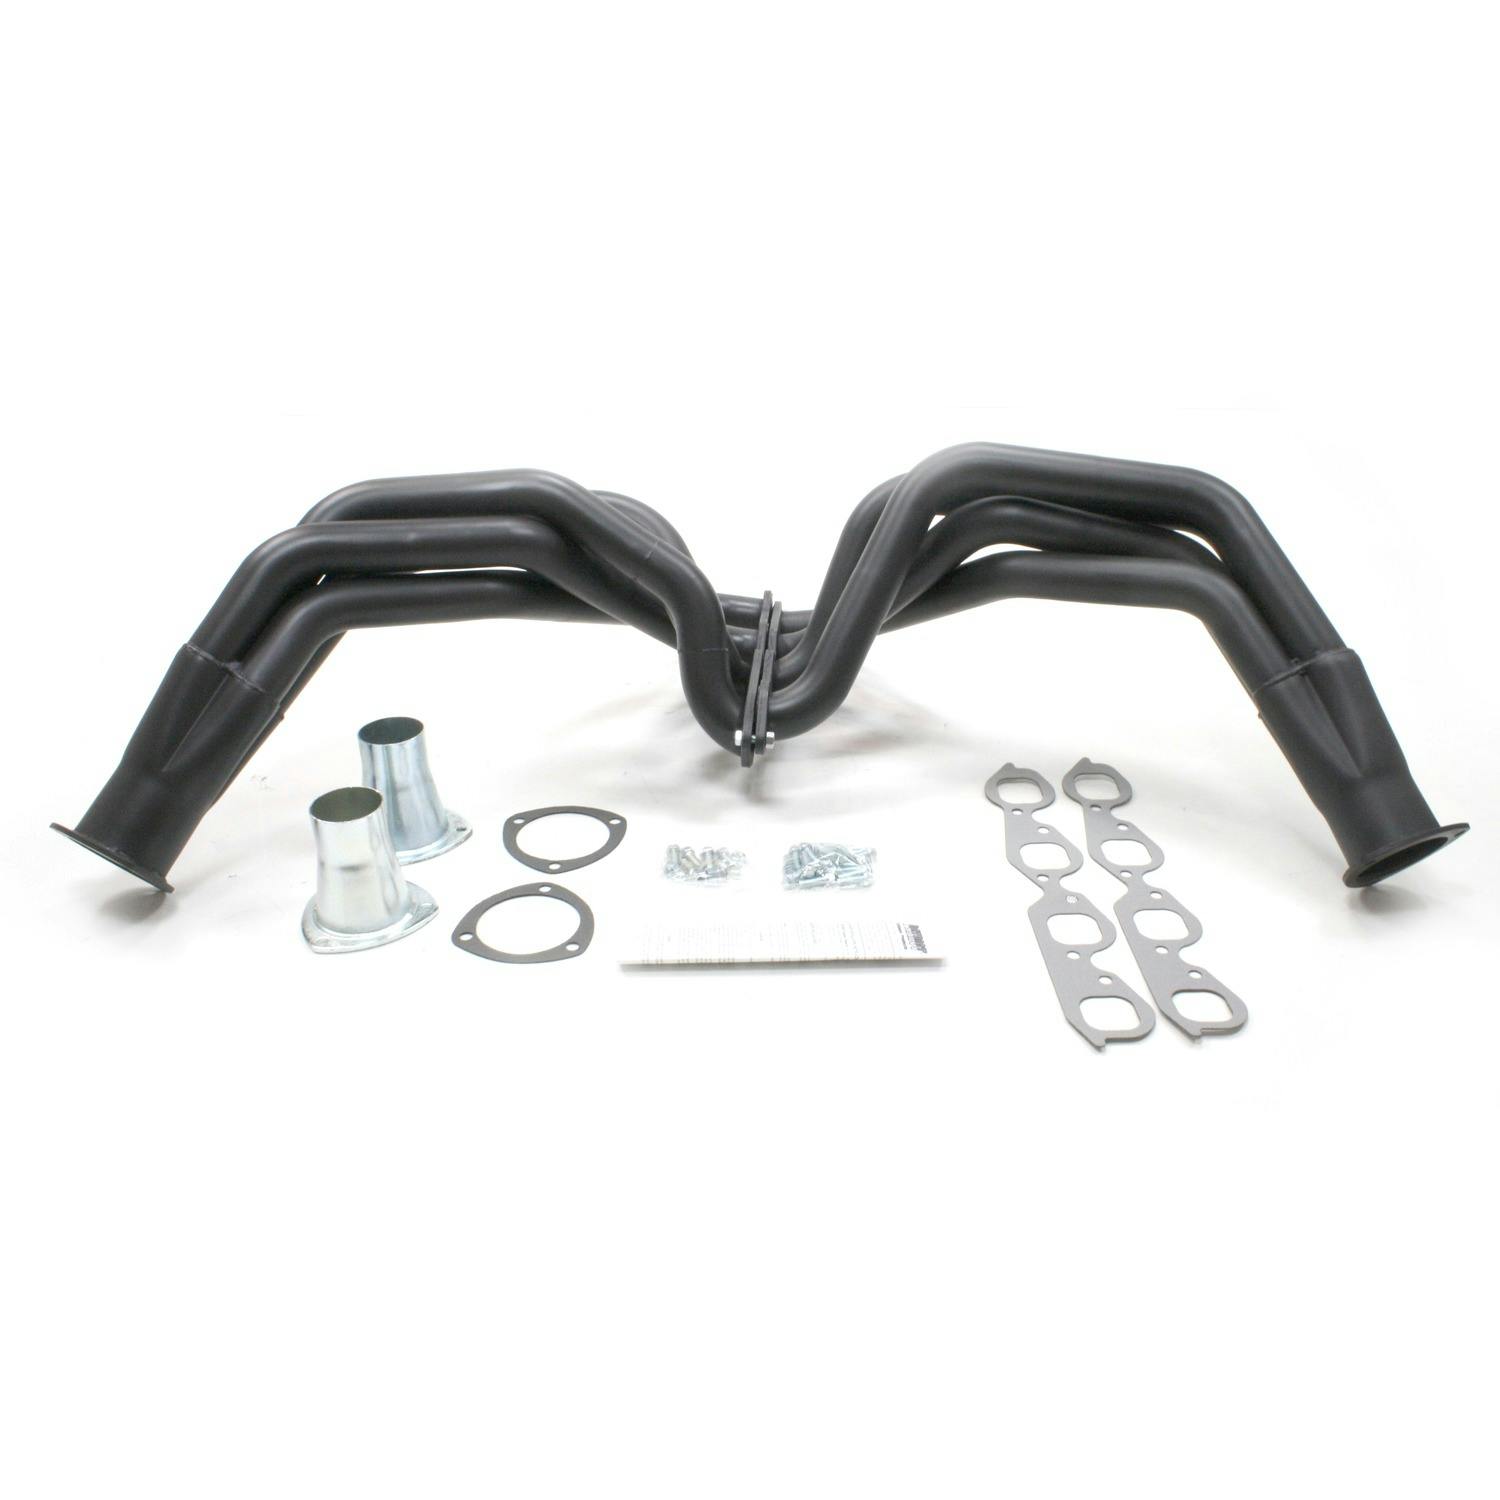 Patriot Exhaust H8036-1 1 1/2 Clippster Exhaust Header for Small Block Chevrolet 82-95